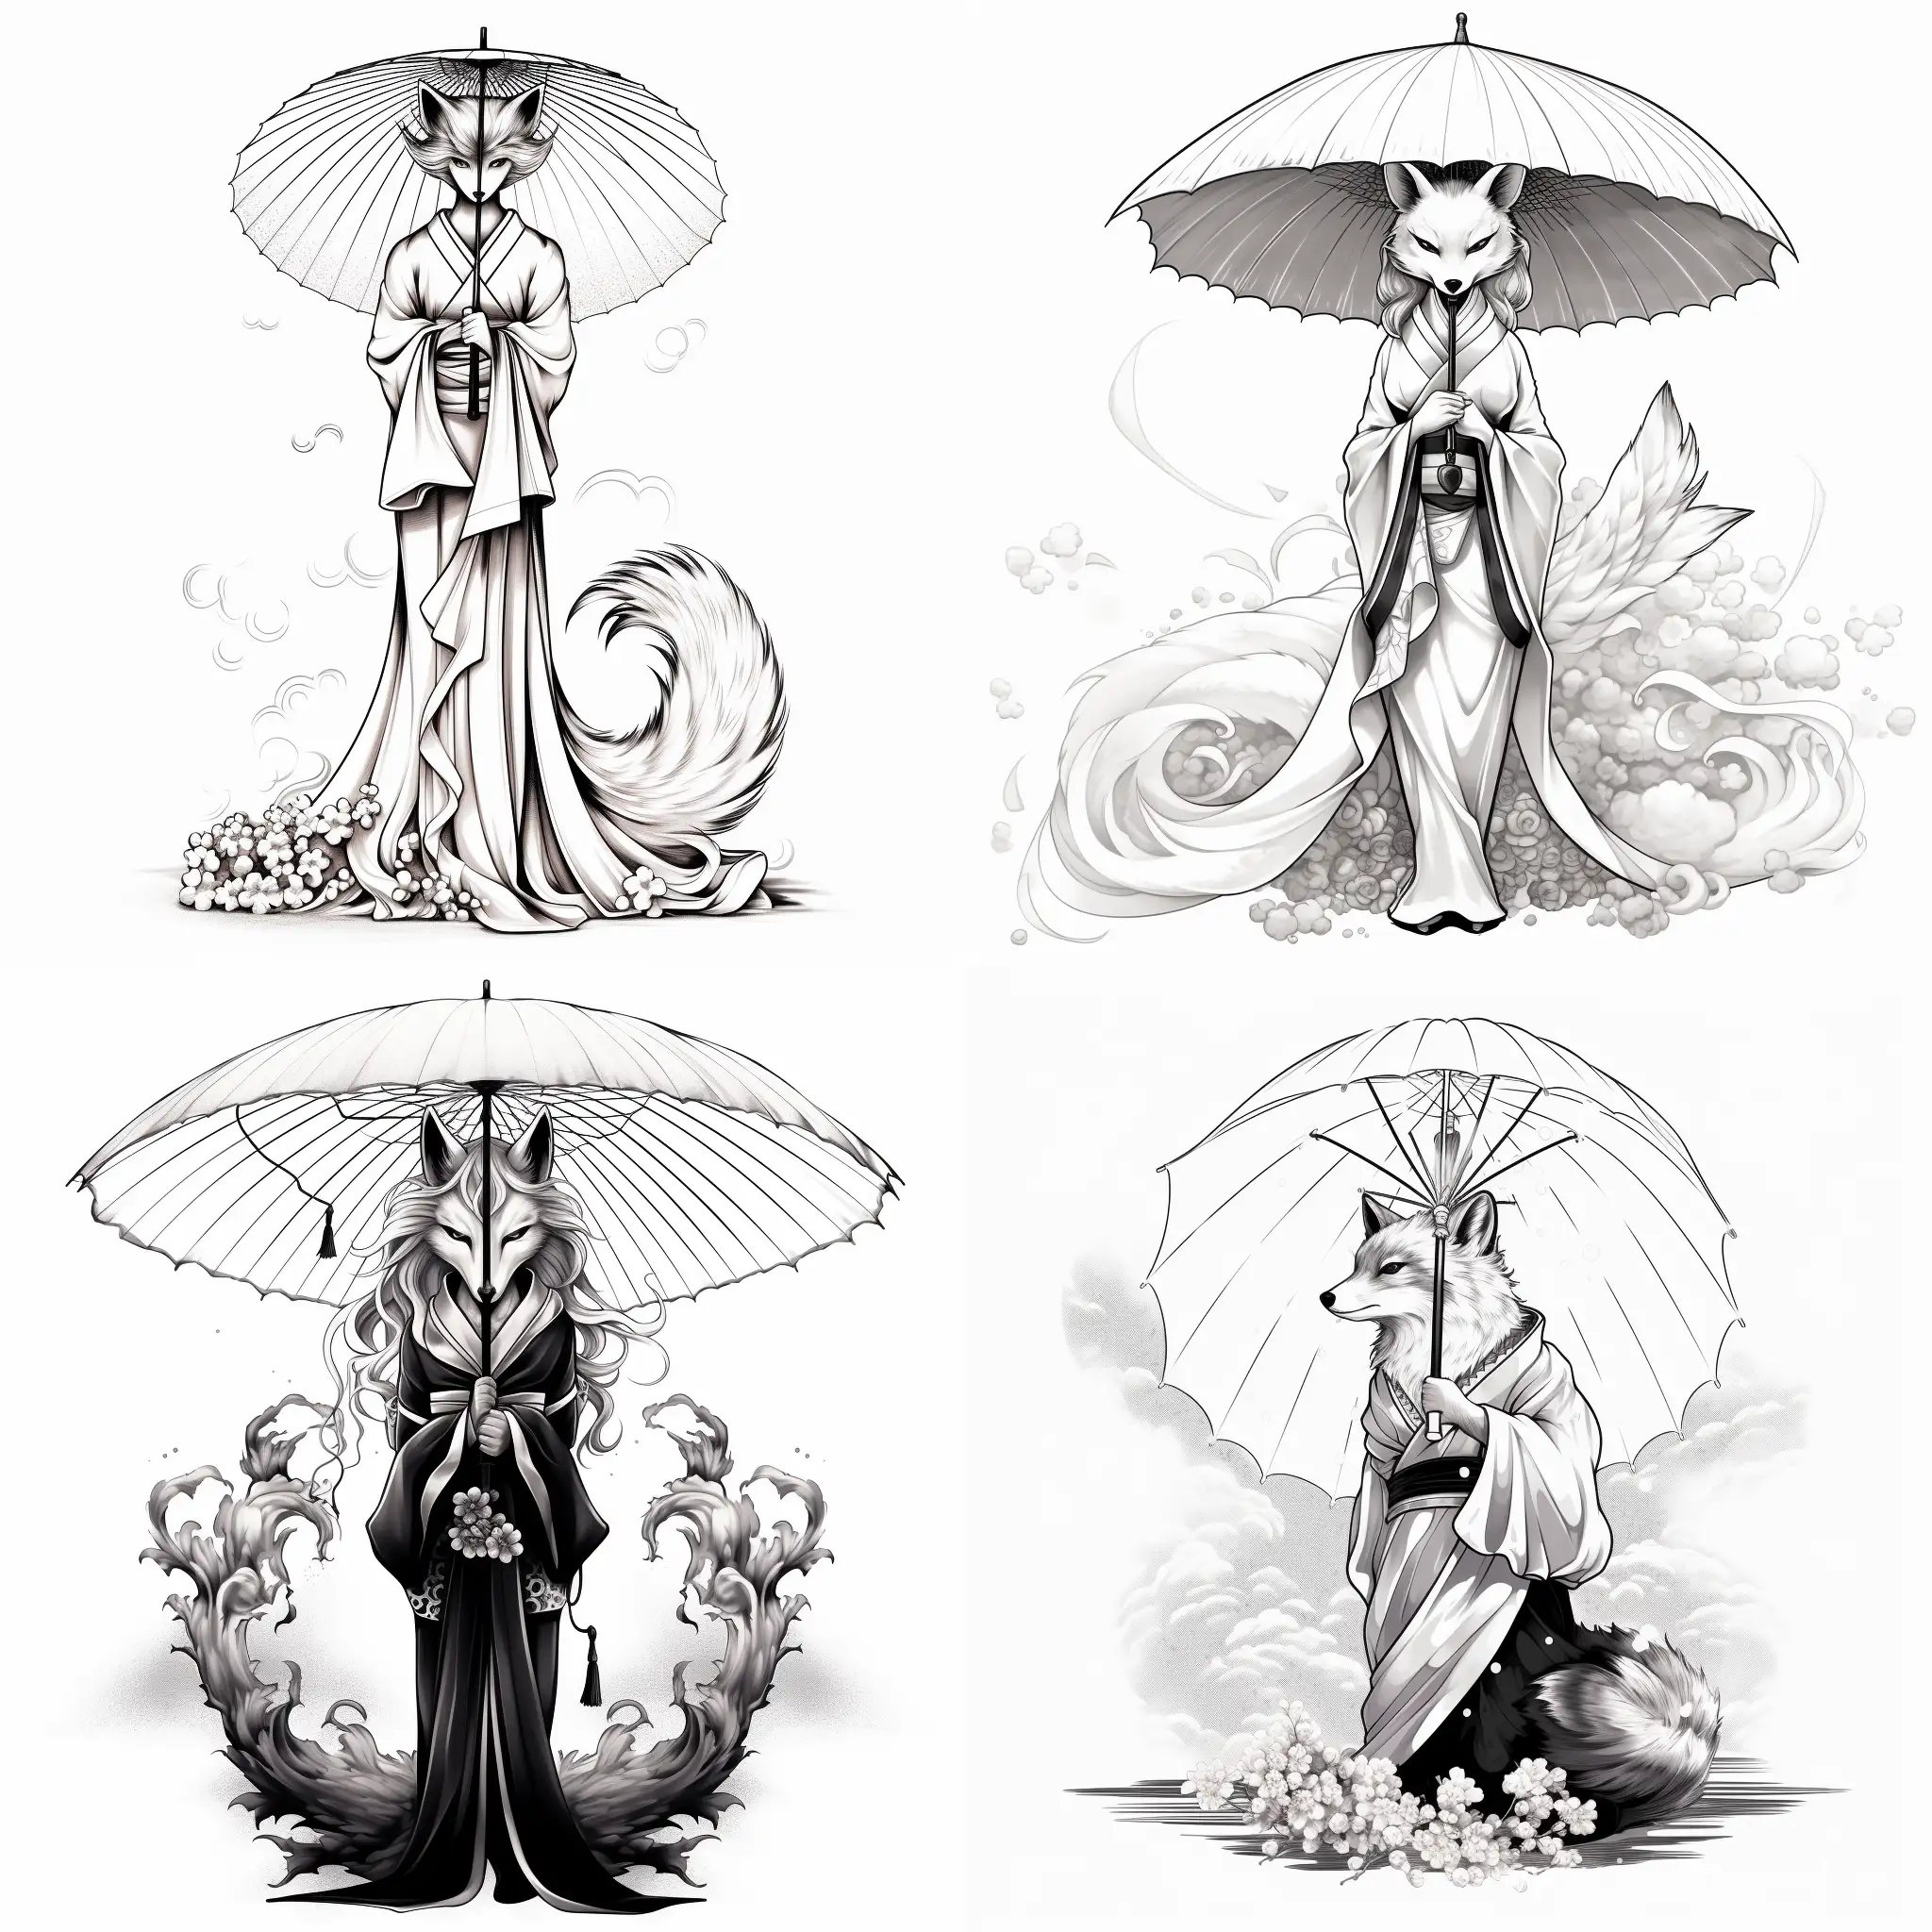 Kitsune-in-Japanese-Dress-Balancing-on-Umbrella-with-Fox-Tails-Monochrome-Graphic-Sketch